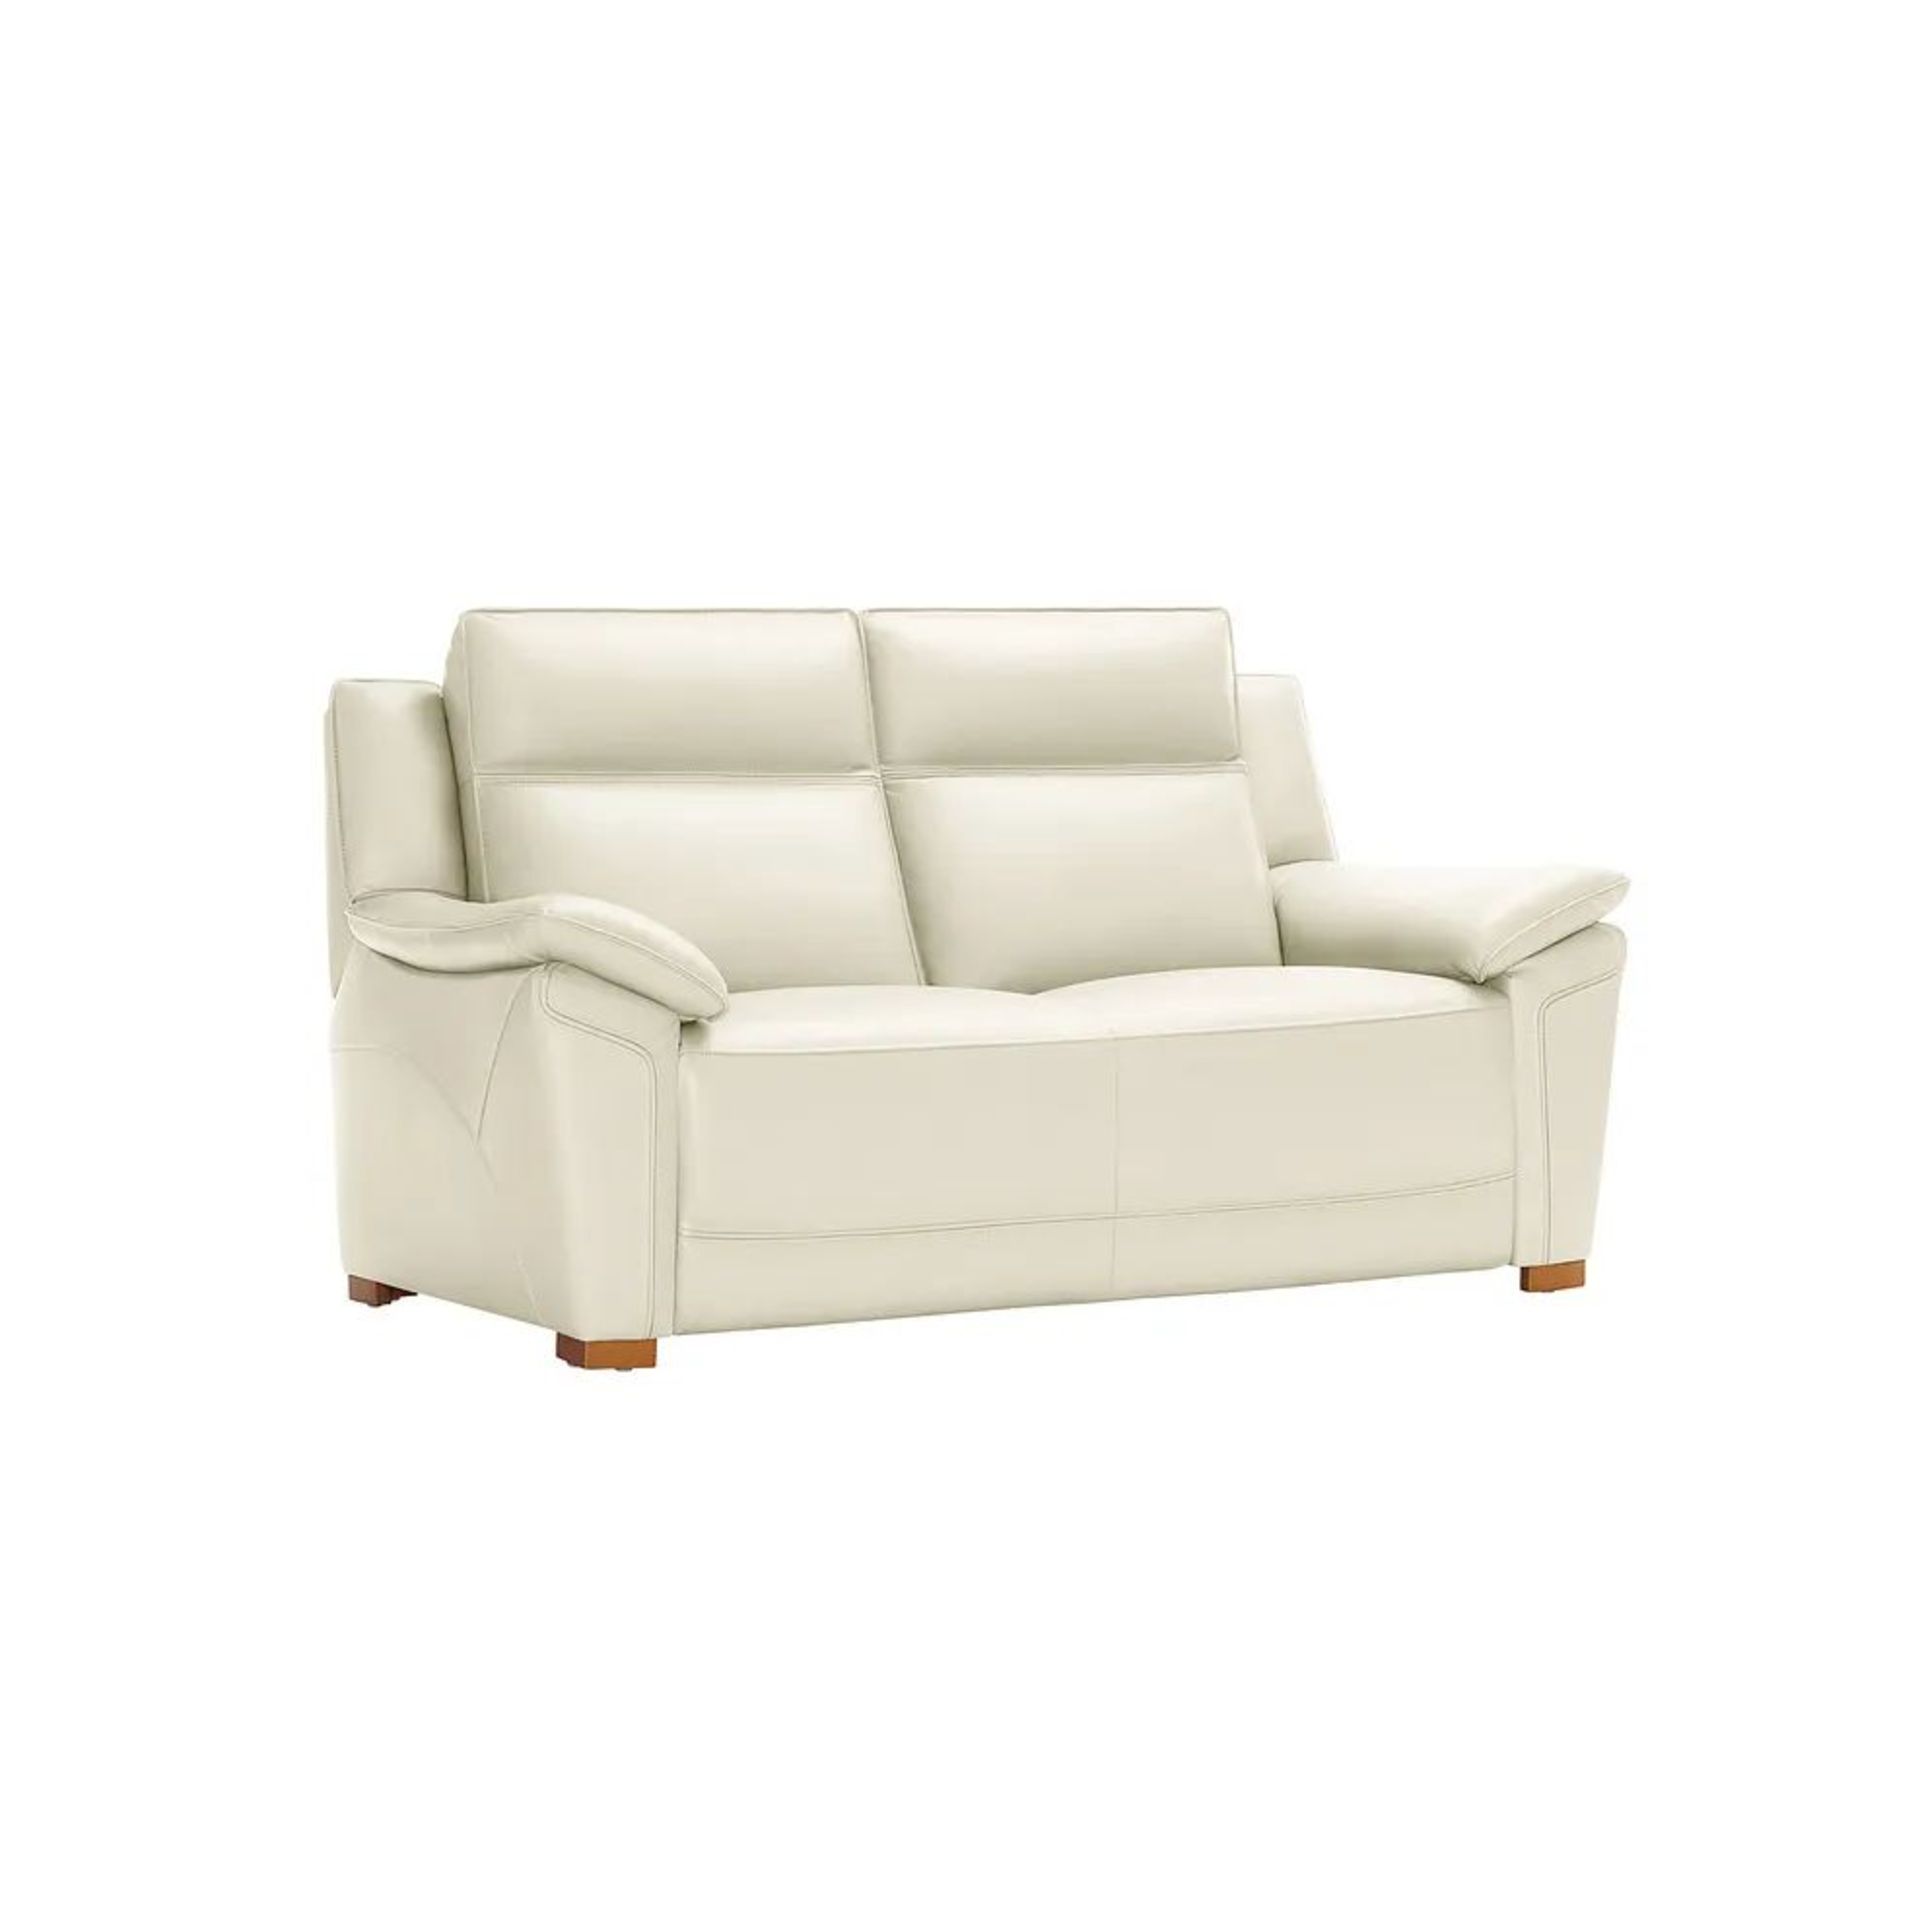 BRAND NEW DUNE 2 Seater Sofa - SNOW WHITE LEATHER. RRP £1579. Pairing comfort with classic design,